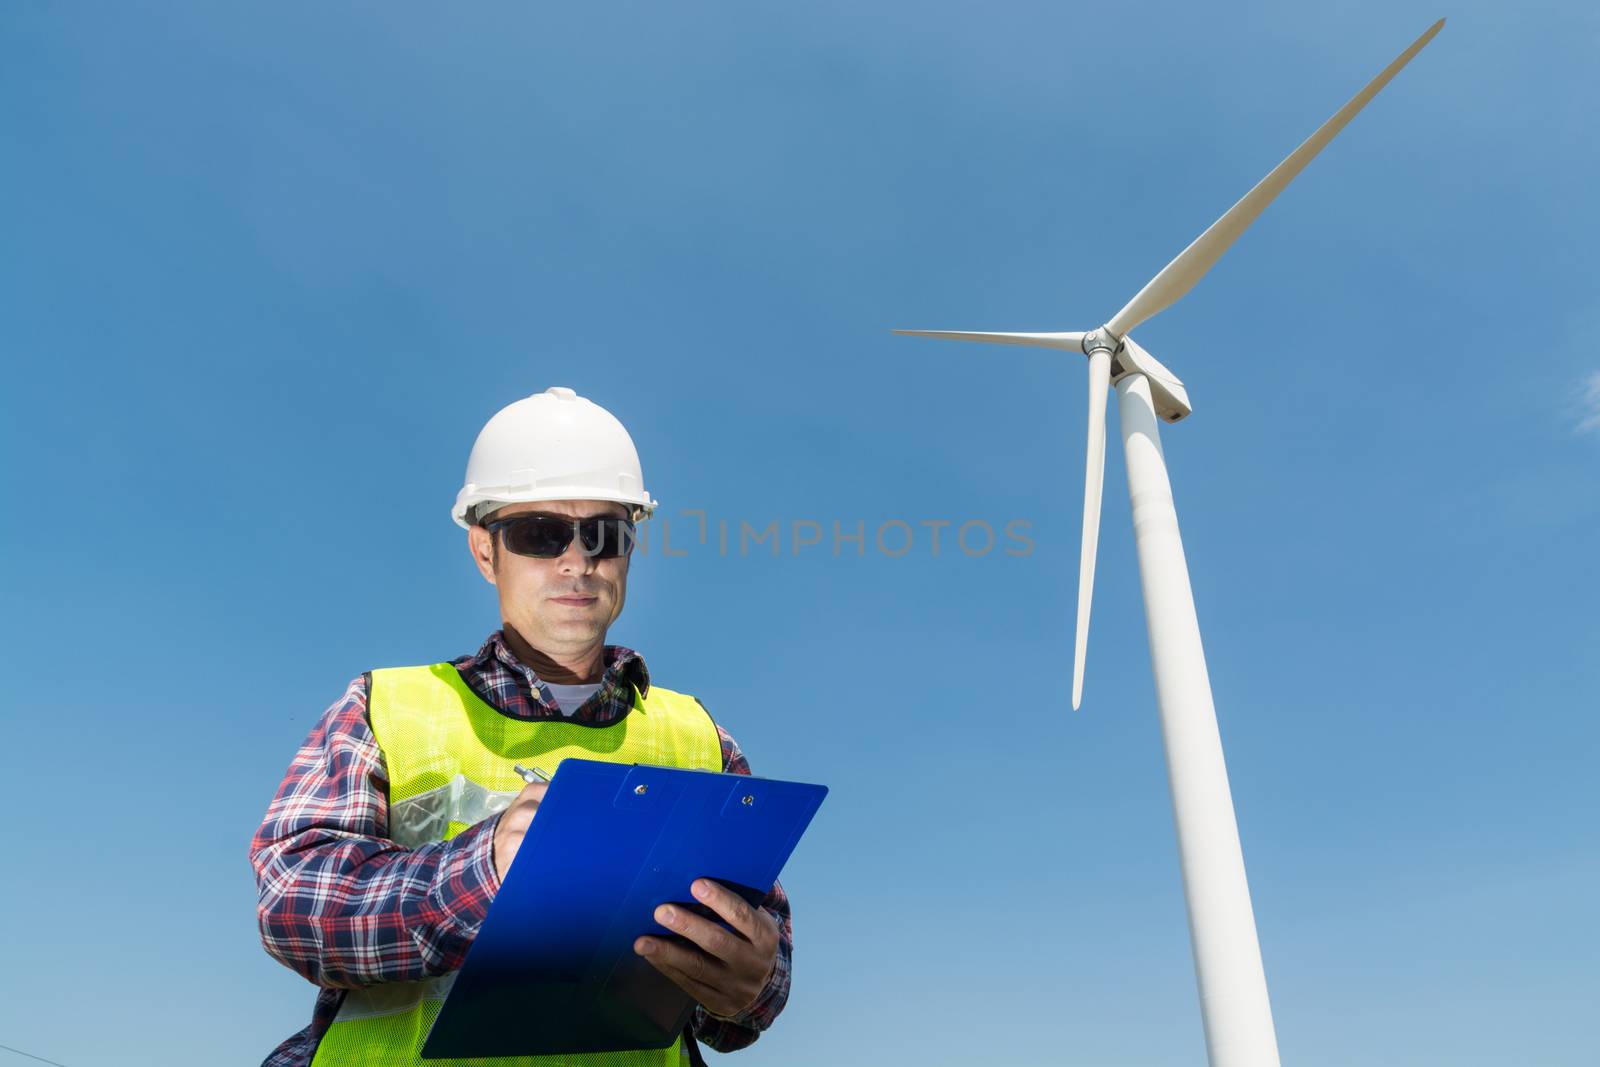 Electric Engineer writing Maintenance report on Clipboard with Wind turbine power Generator Tower Background as Green energy or Renewable Energy Technology Project Development Concept.